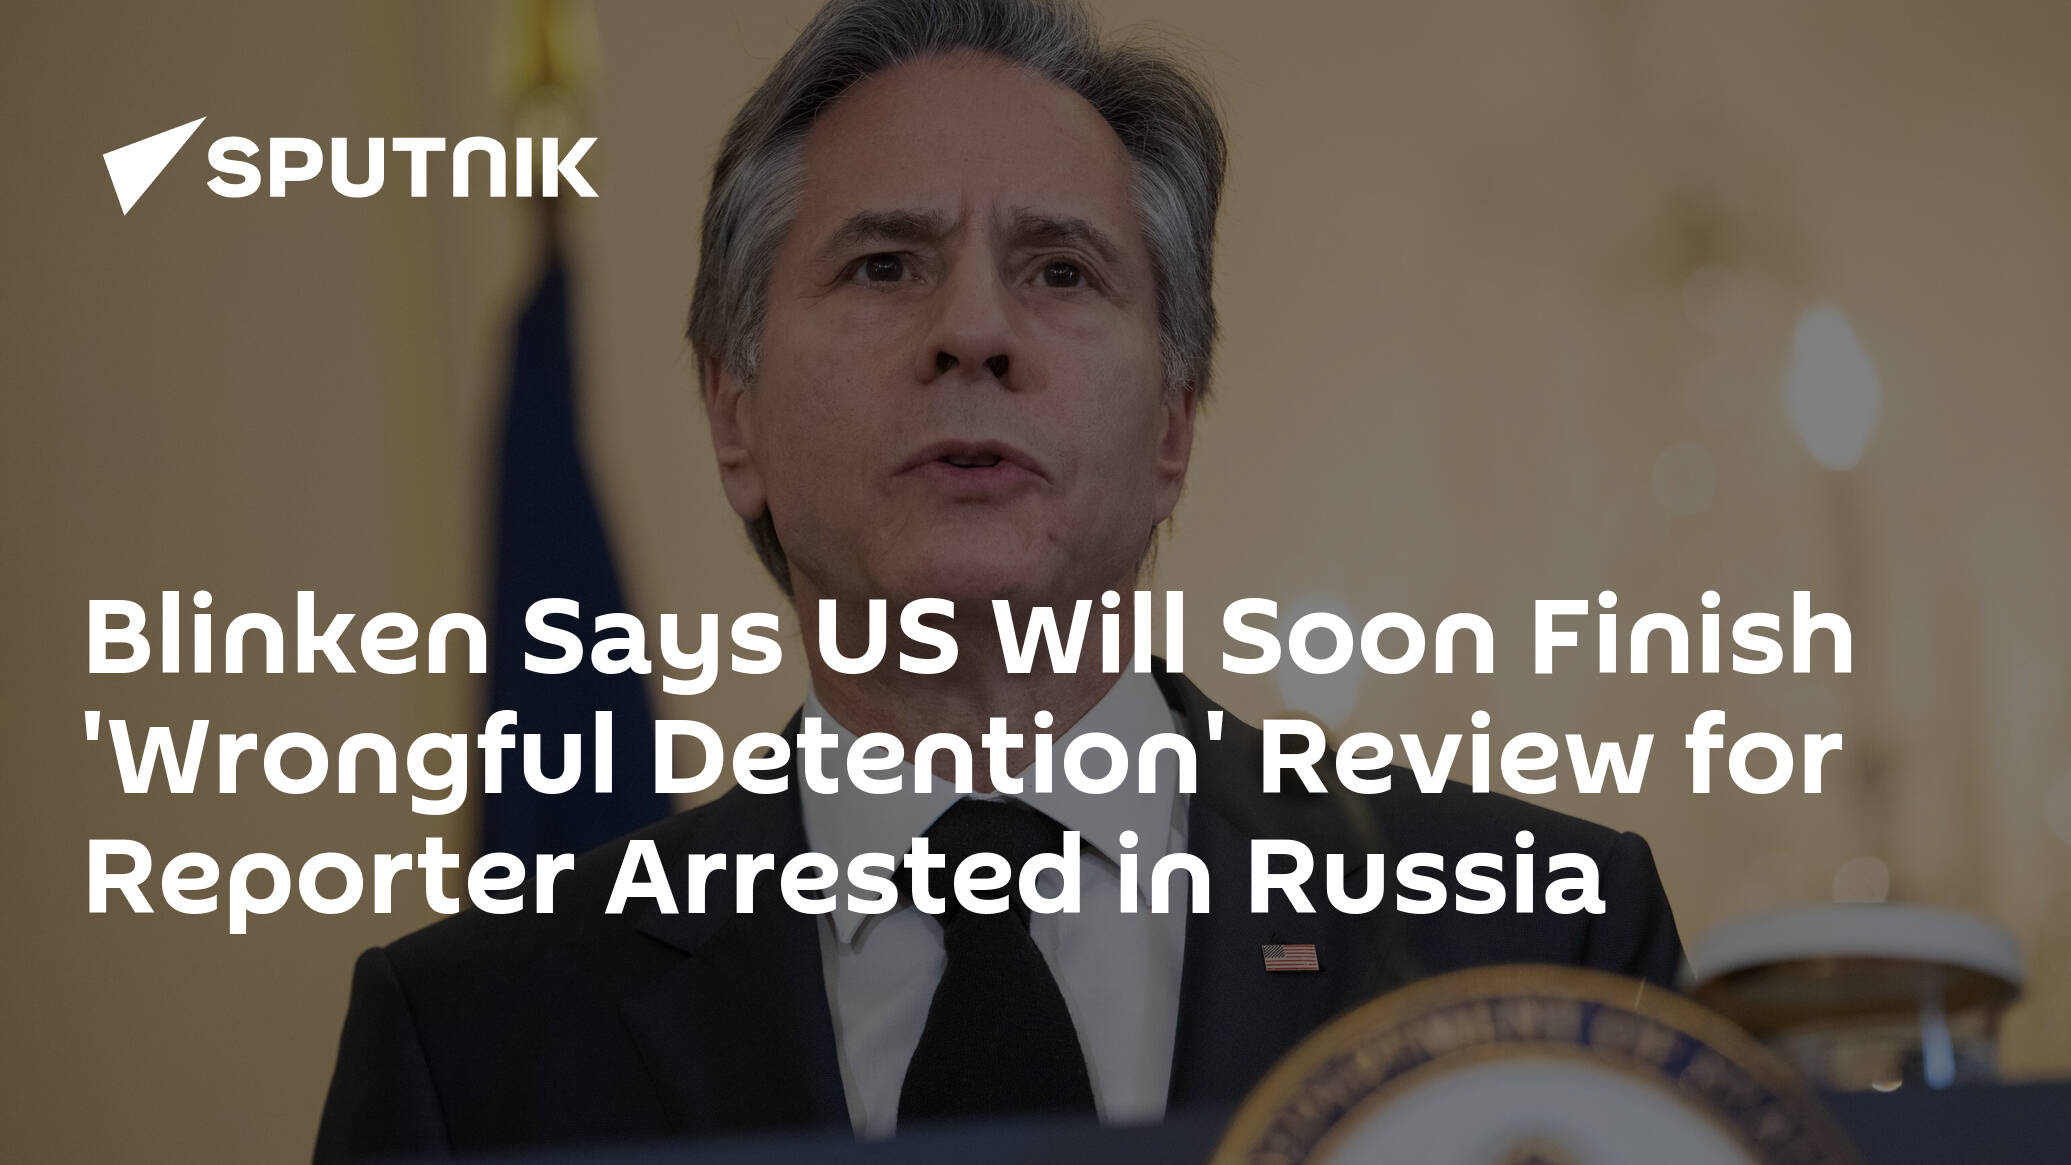 Blinken Says US Will Soon Finish 'Wrongful Detention' Review for Reporter Arrested in Russia